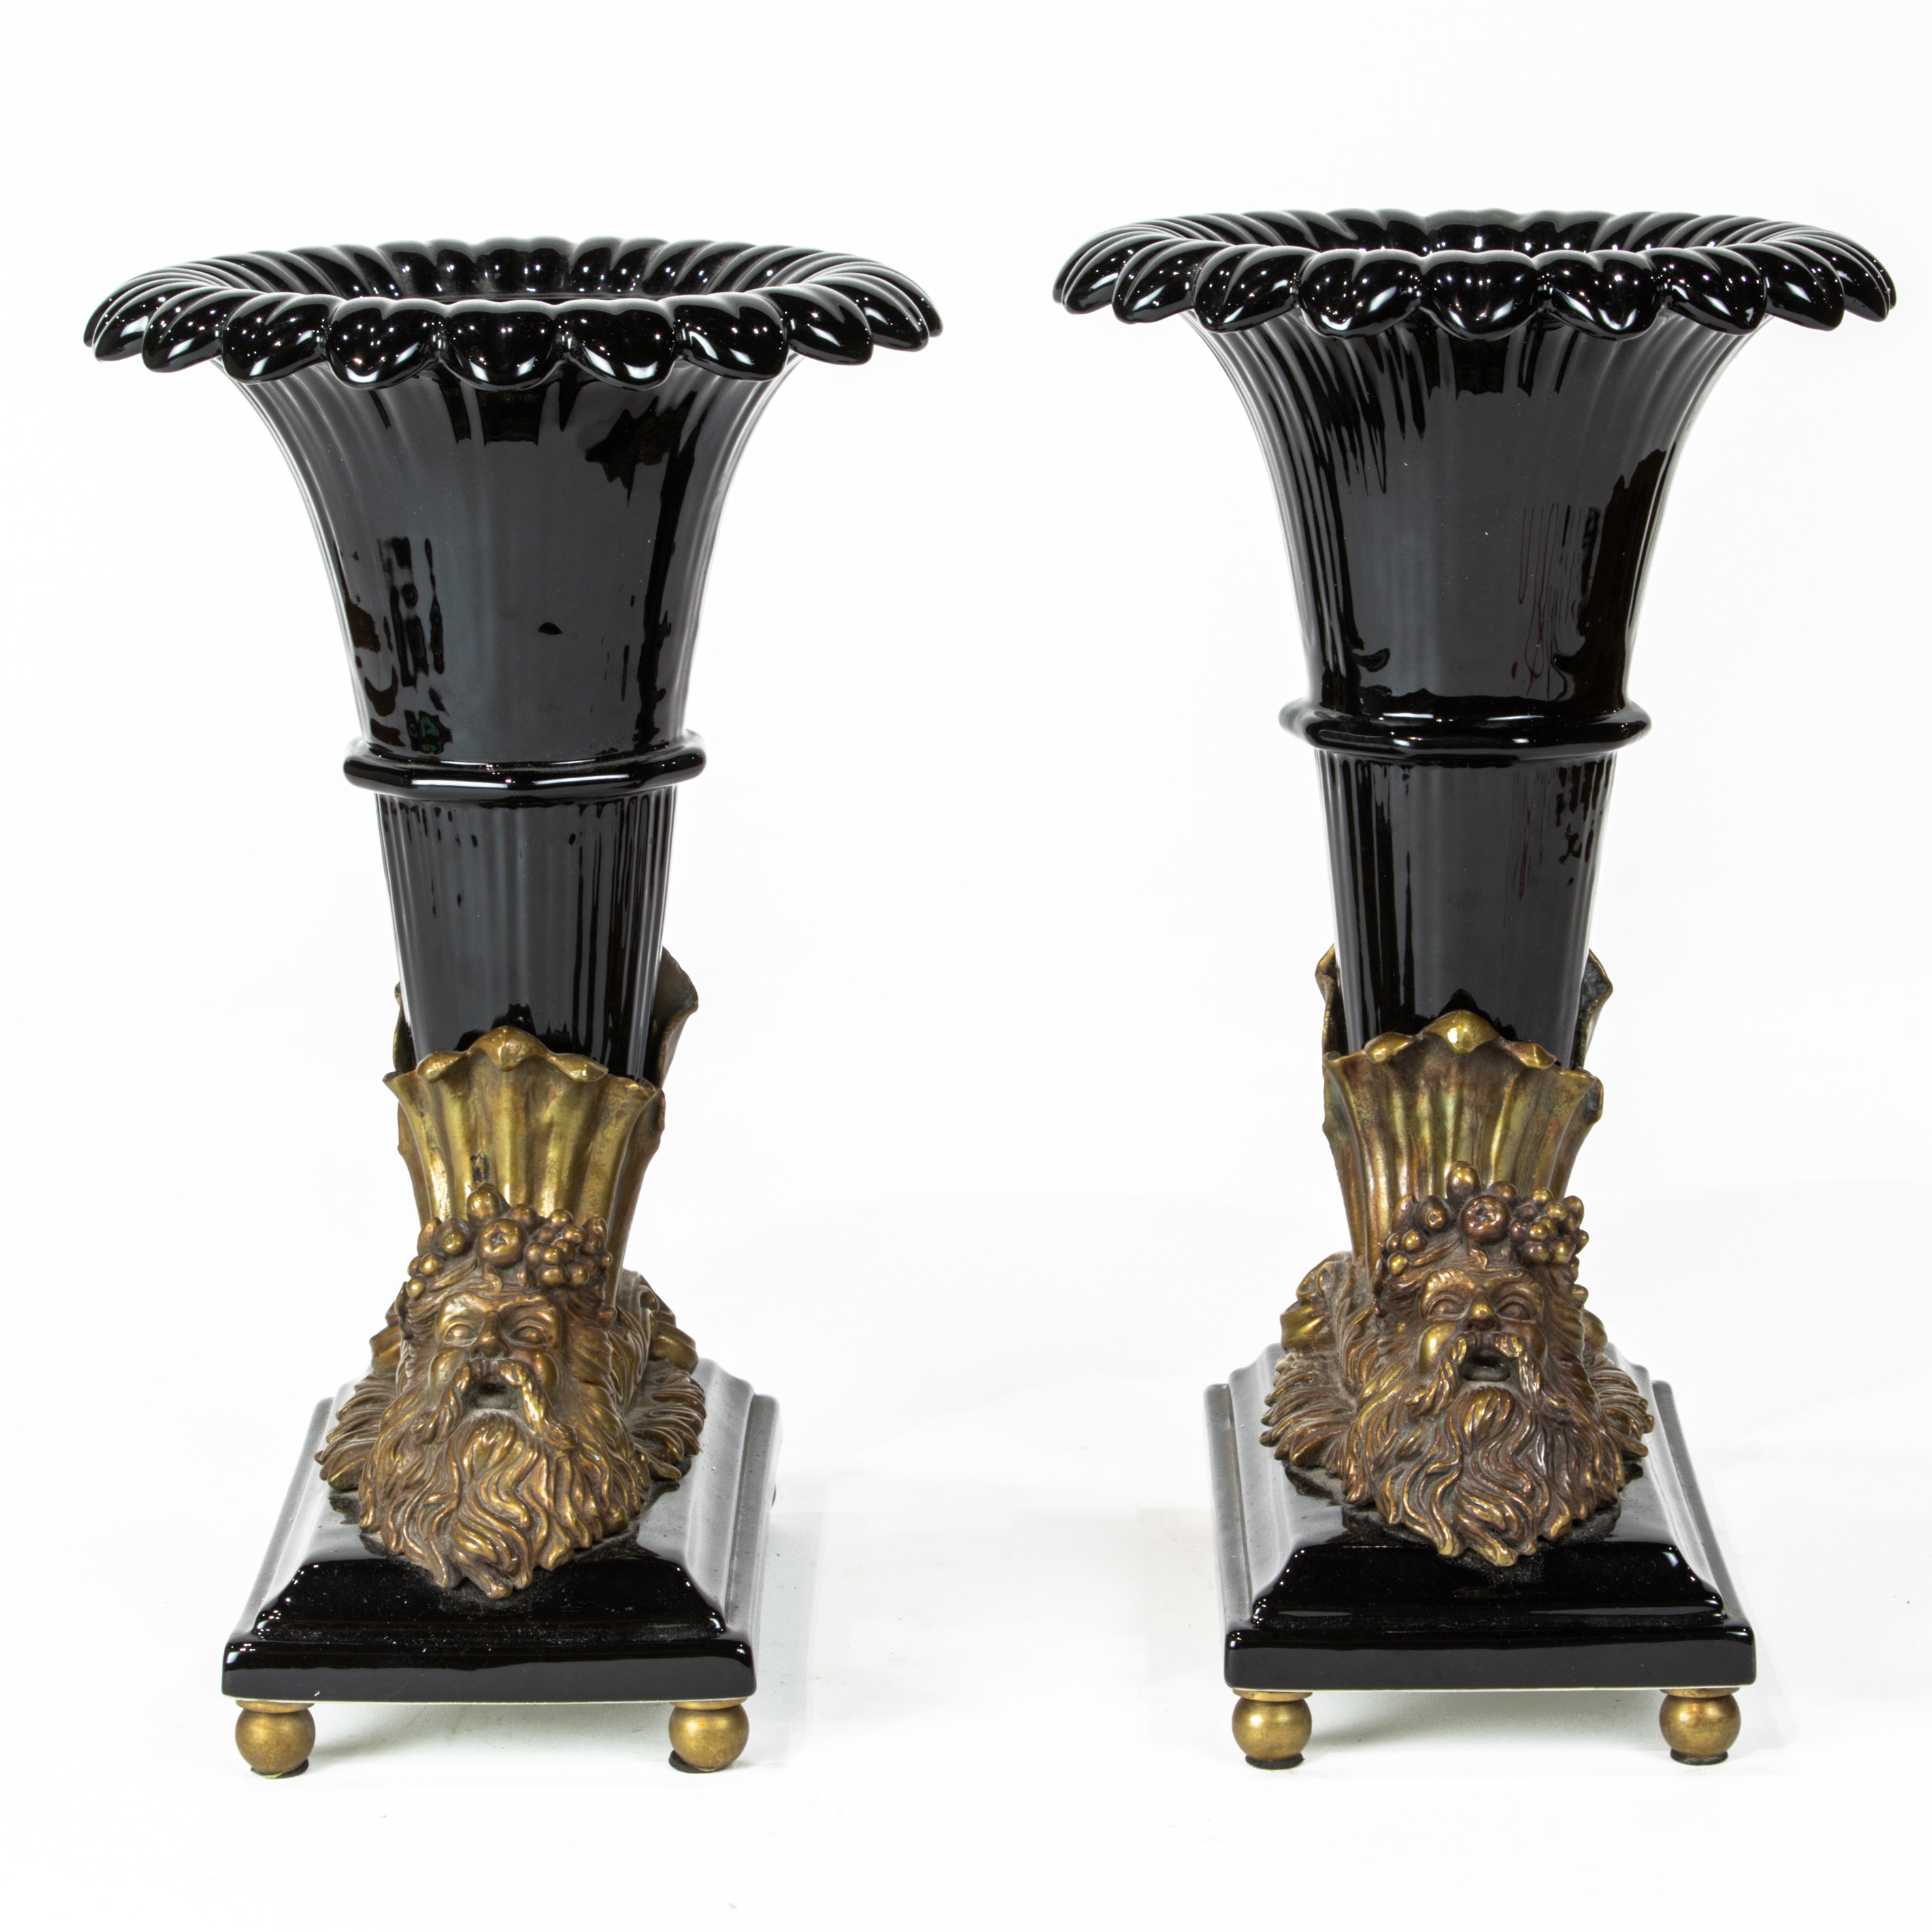 A PAIR OF BRONZE MOUNTED URNS A 3a4284